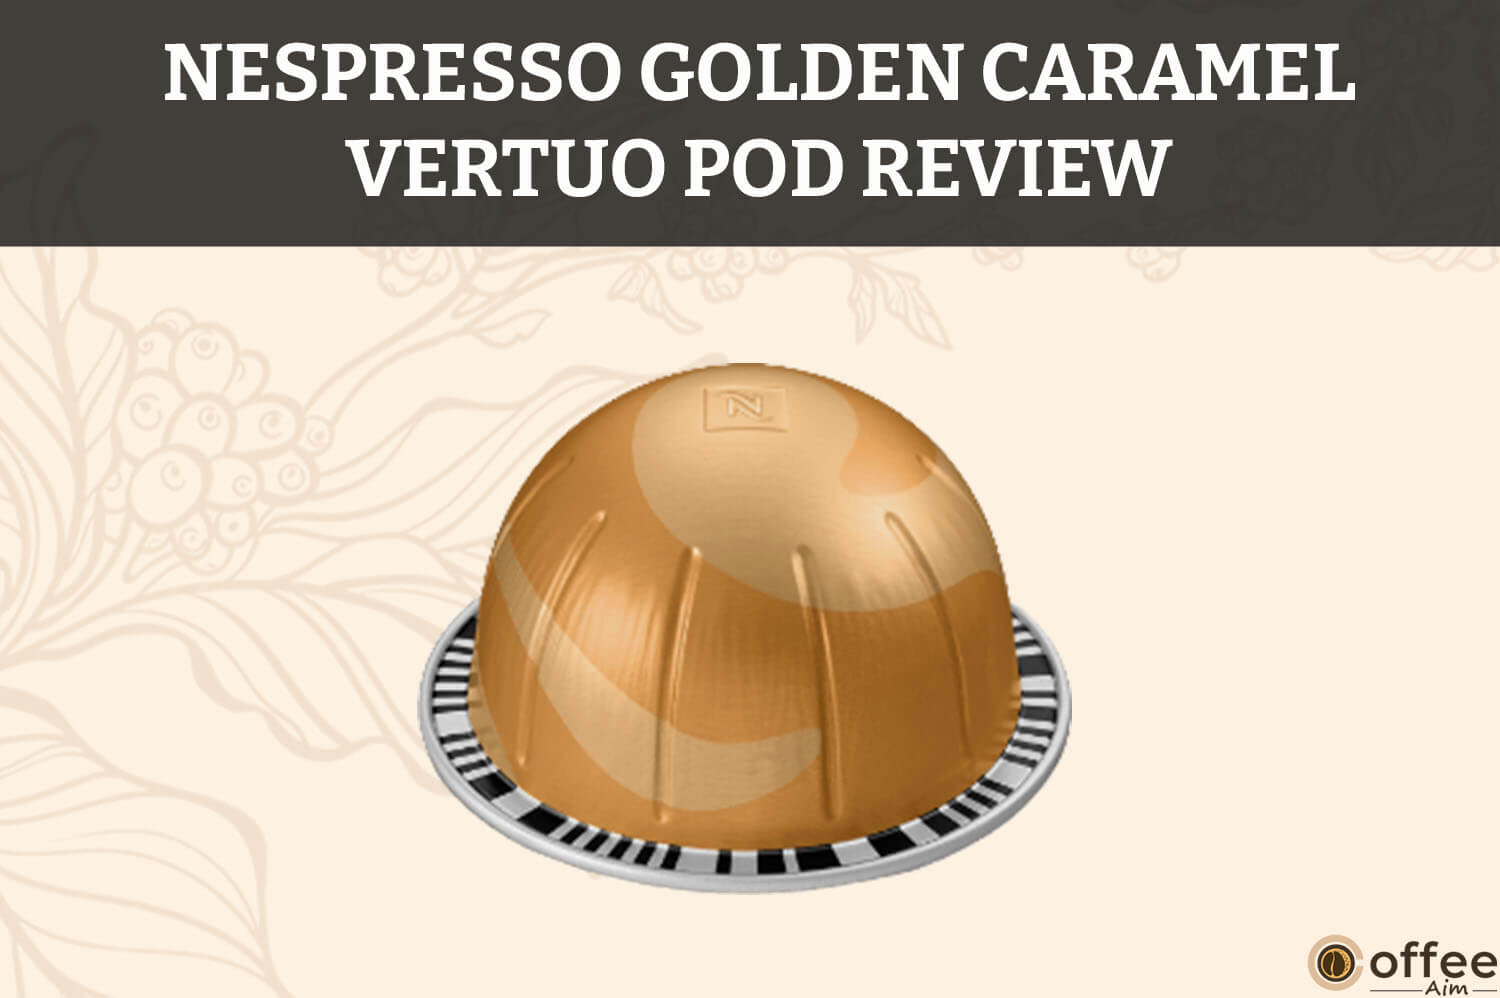 Featured image for the article "Nespresso Golden Caramel Vertuo Pod Review"